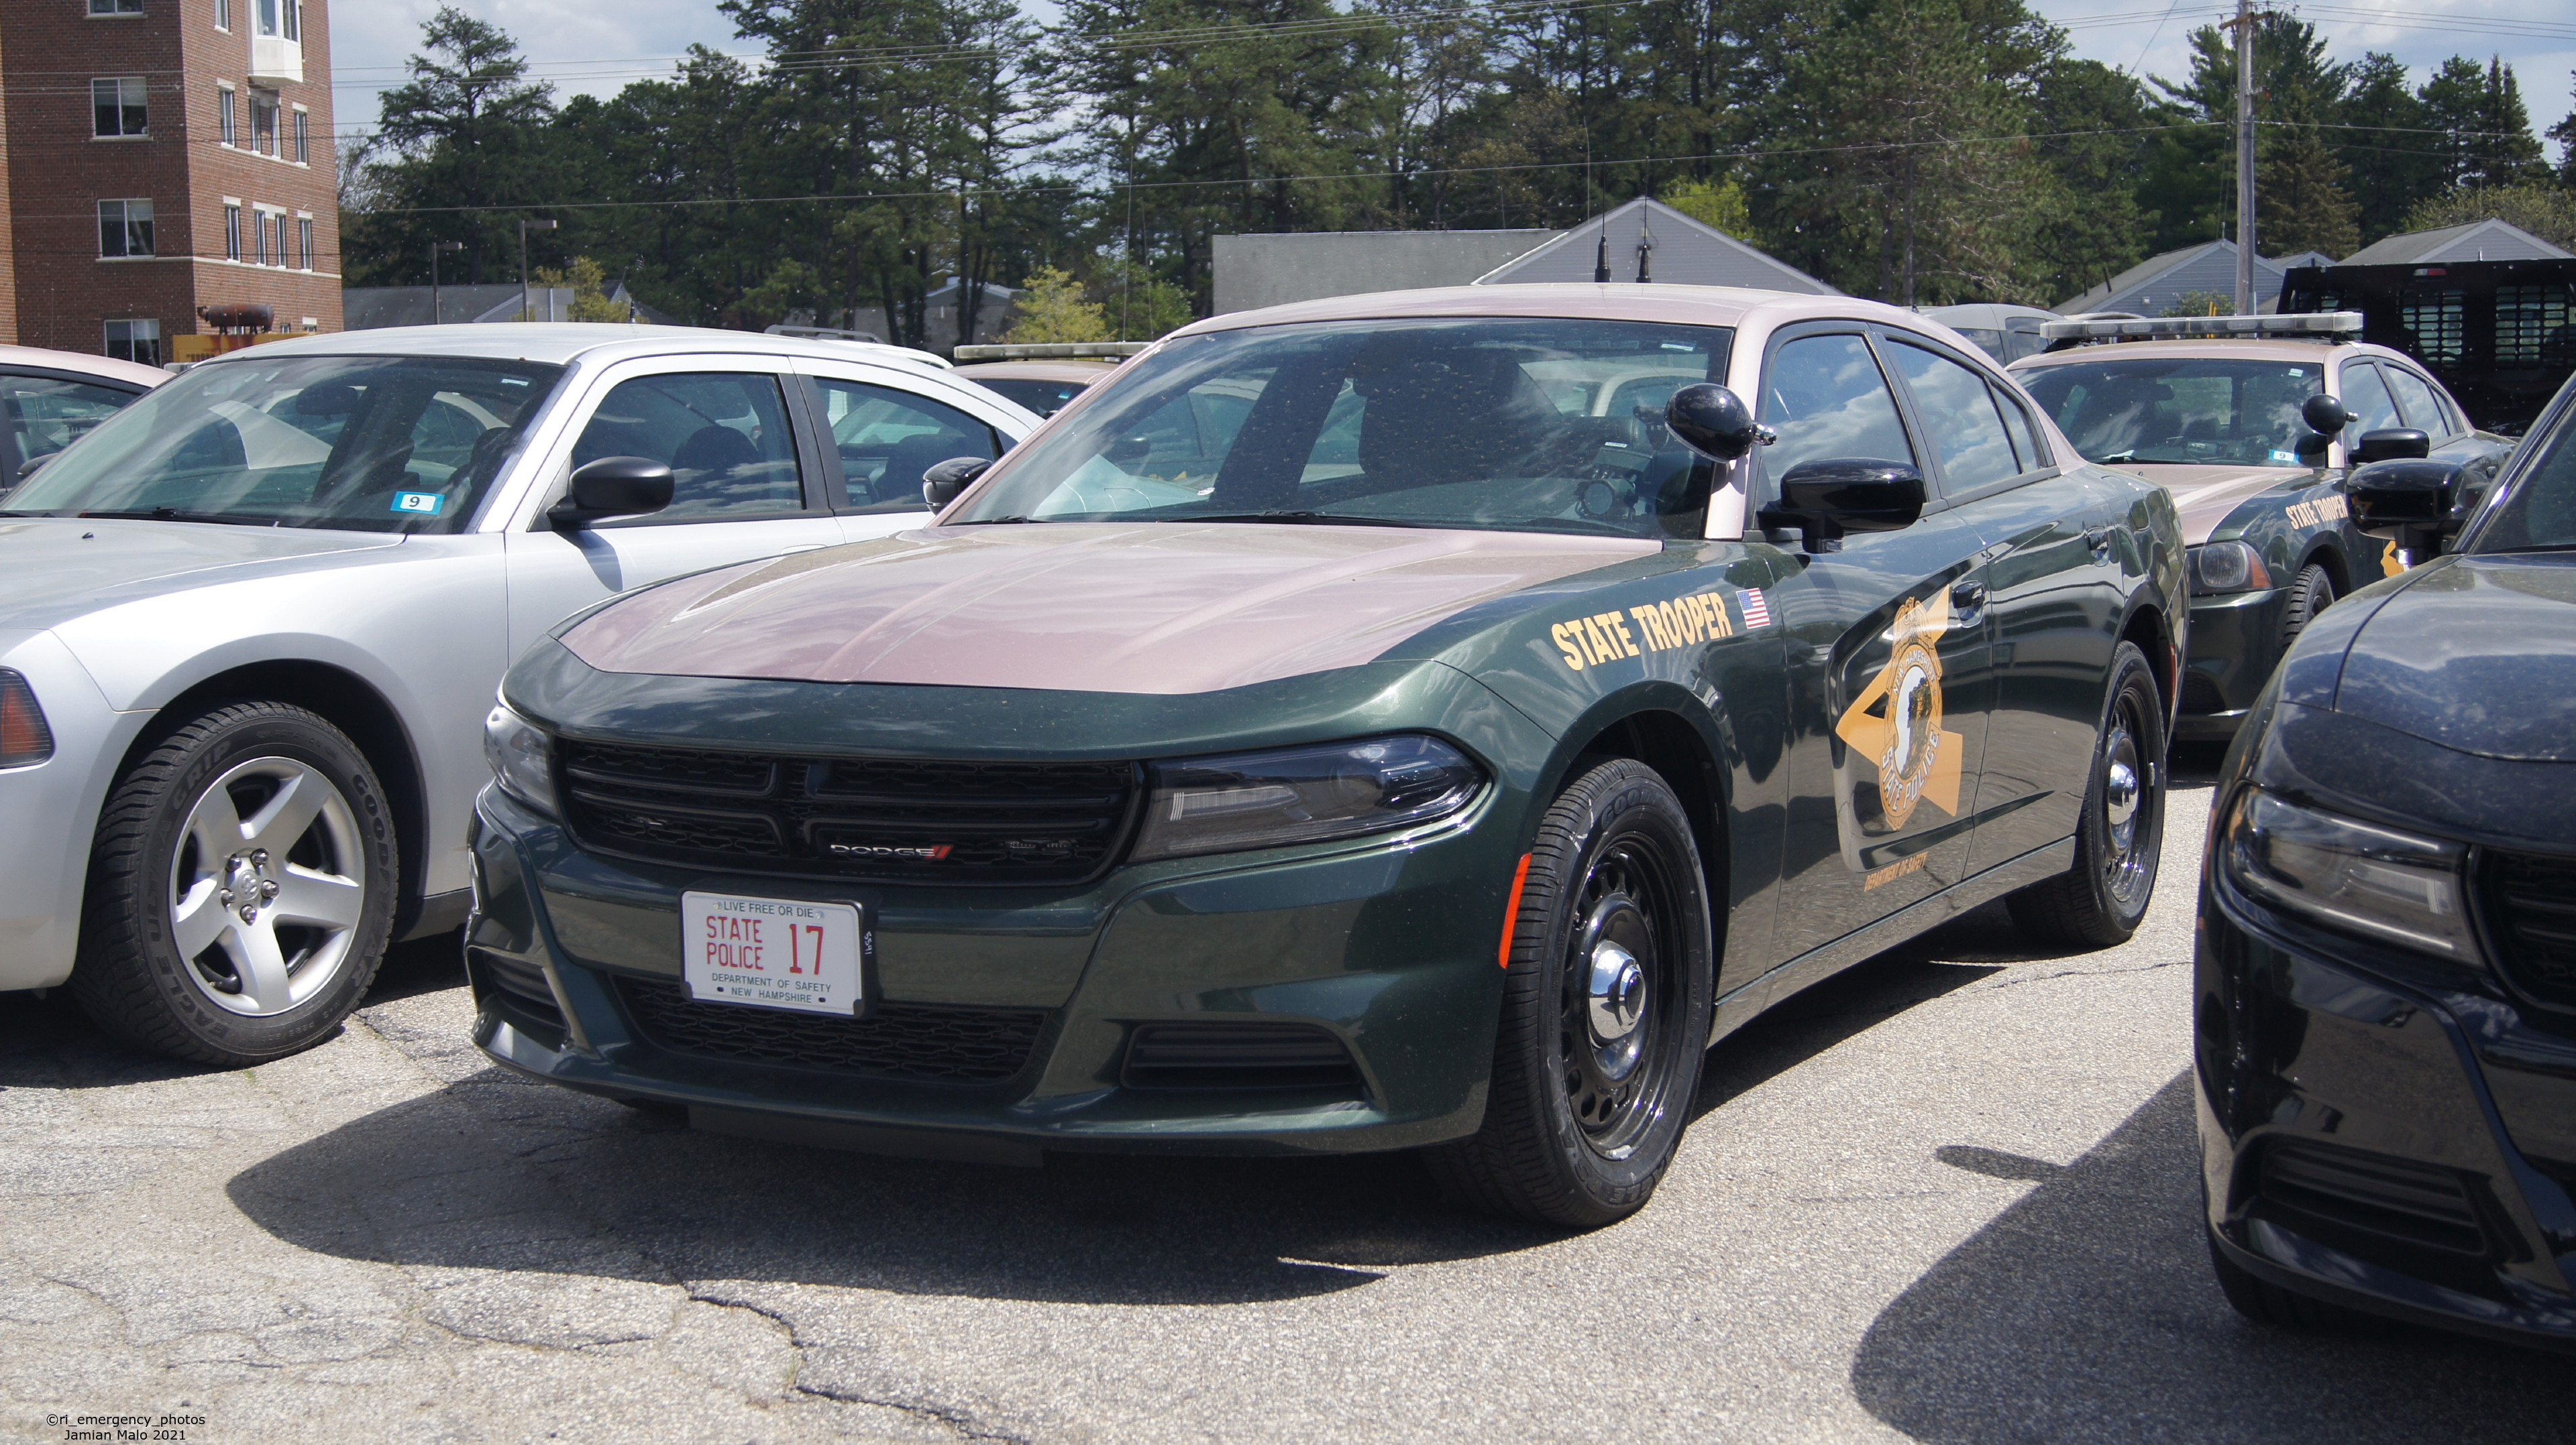 A photo  of New Hampshire State Police
            Cruiser 17, a 2020 Dodge Charger             taken by Jamian Malo